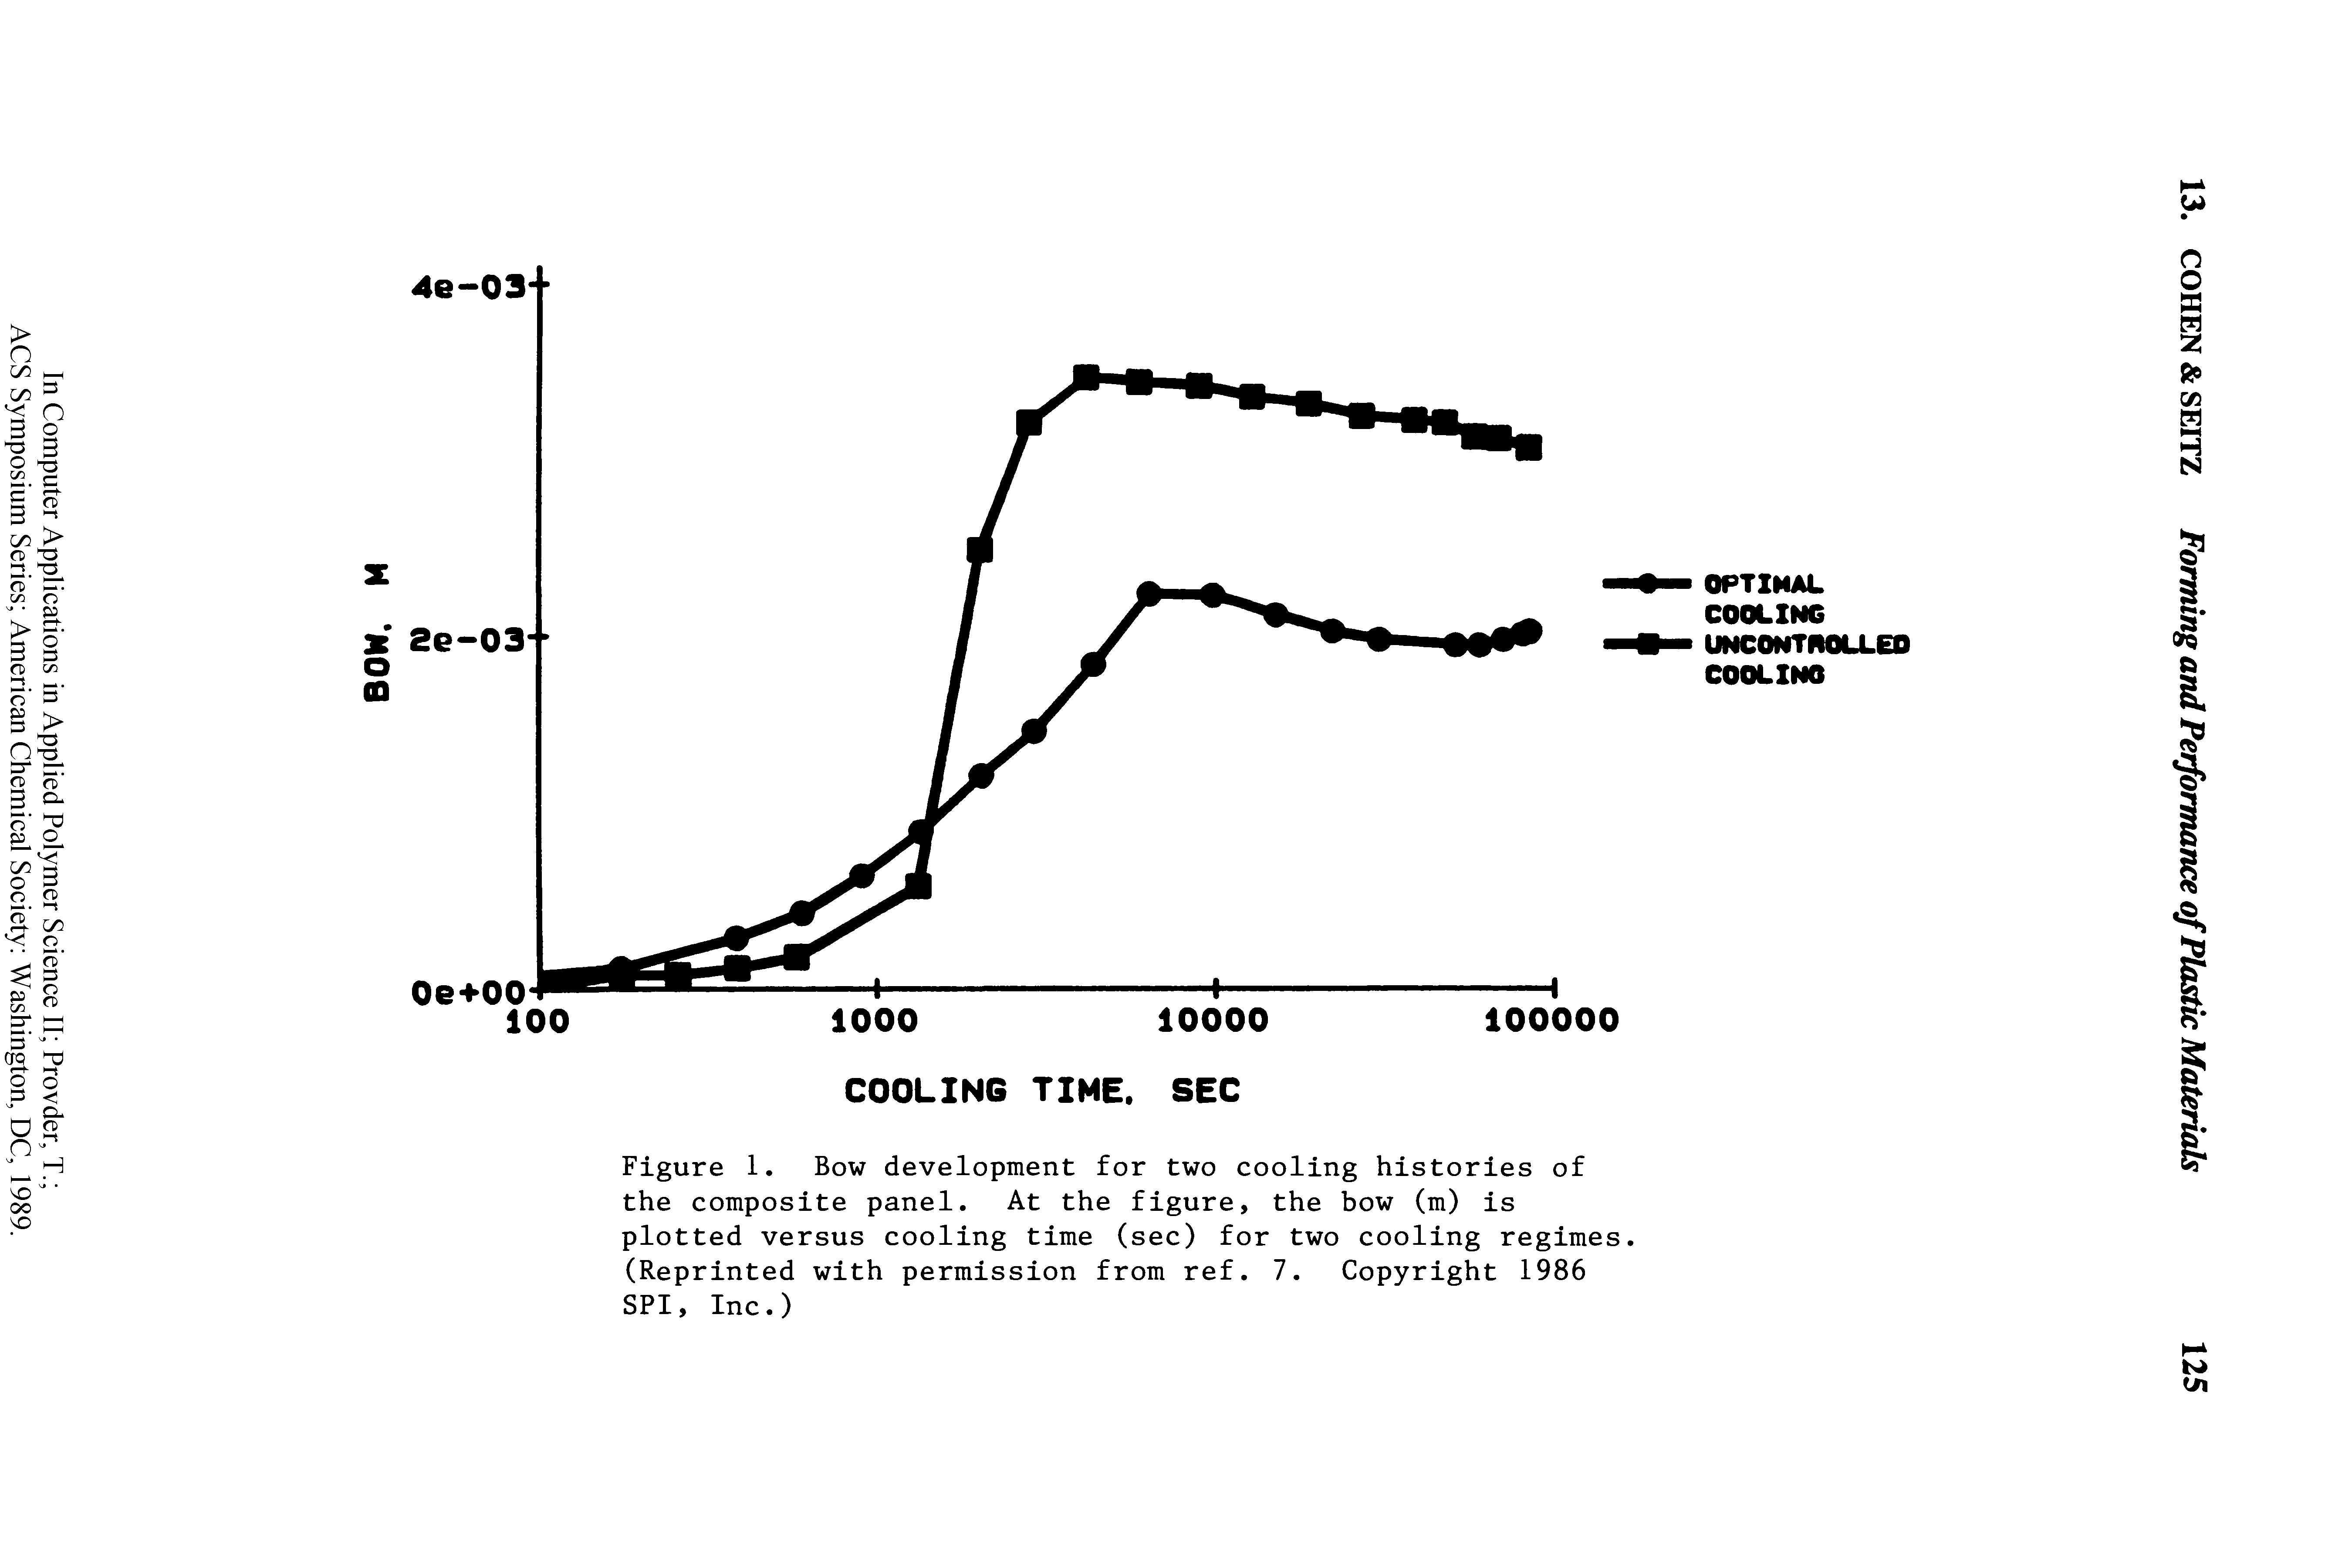 Figure 1. Bow development for two cooling histories of the composite panel. At the figure, the bow (m) is plotted versus cooling time (sec) for two cooling regimes. (Reprinted with permission from ref. 7. Copyright 1986 SPI, Inc.)...